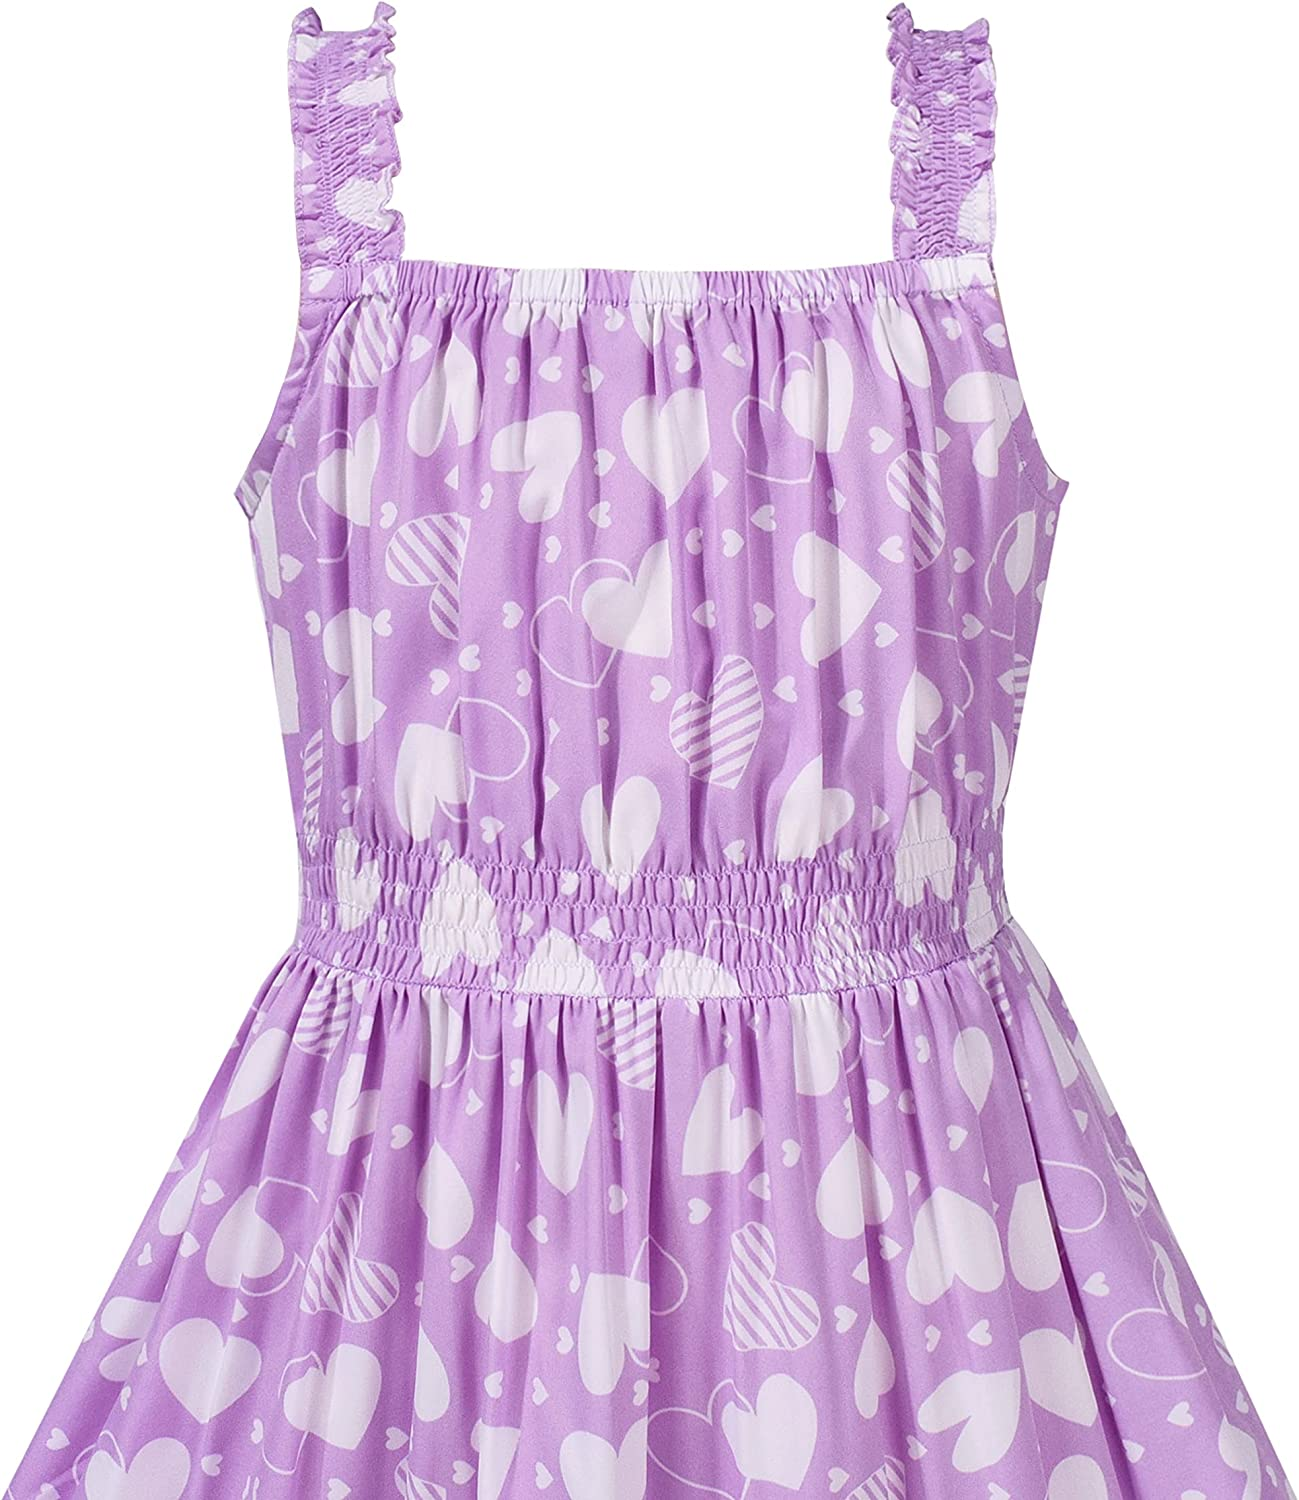 Girls' Purple Hi-Low Summer Party Dress Size 6-12, Comfortable Polyester Material